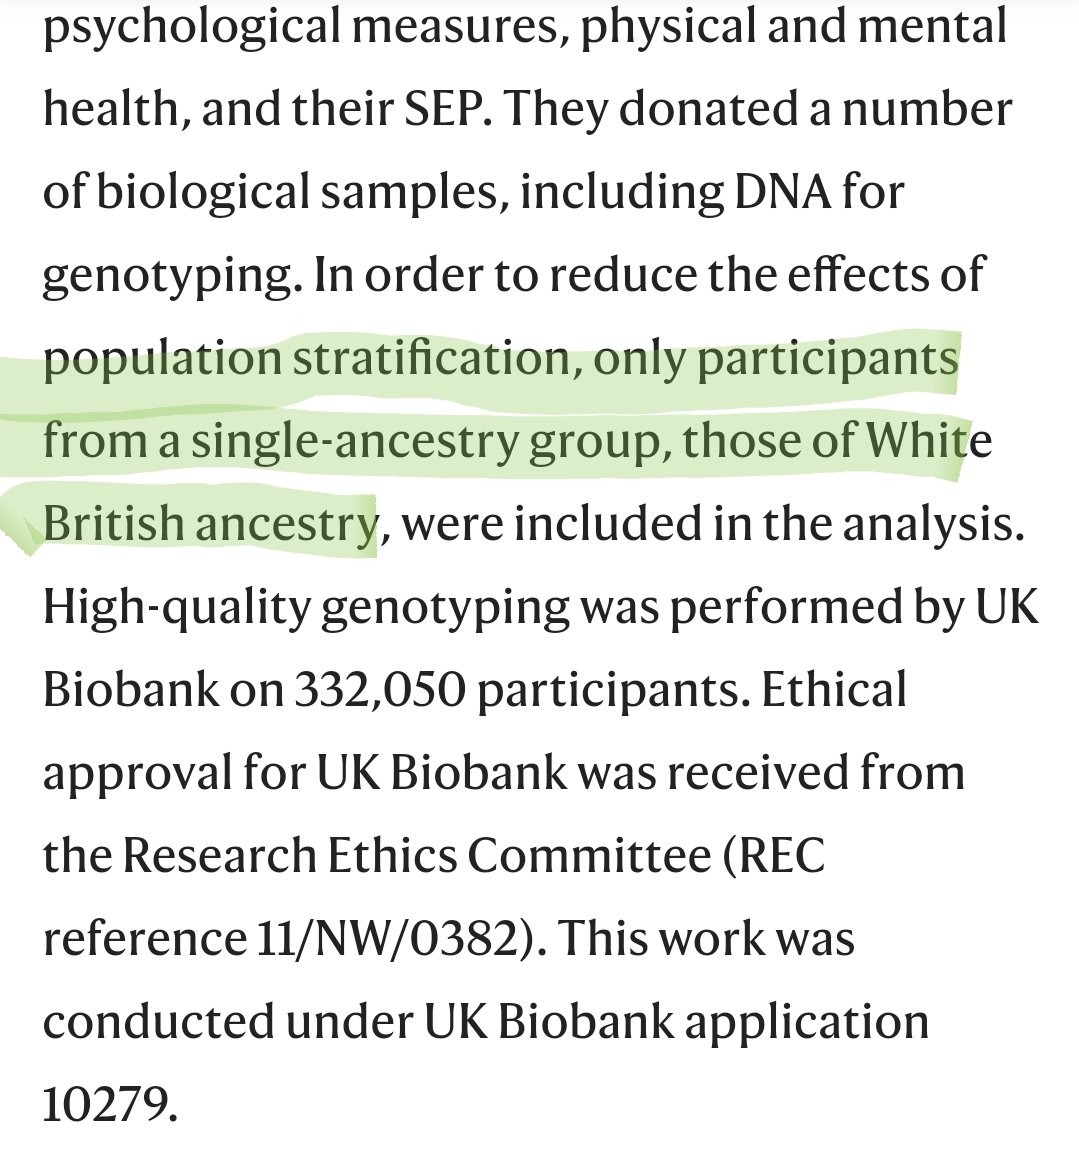 3/Not only that, but in only surveying white brits (they state this explicitly) the paper doesnt mention *whiteness* as it excludes the french, germans, finish, polish, swedes, and irish to name a few. So it doesn't look at white populations as a whole, and doesn't claim to: